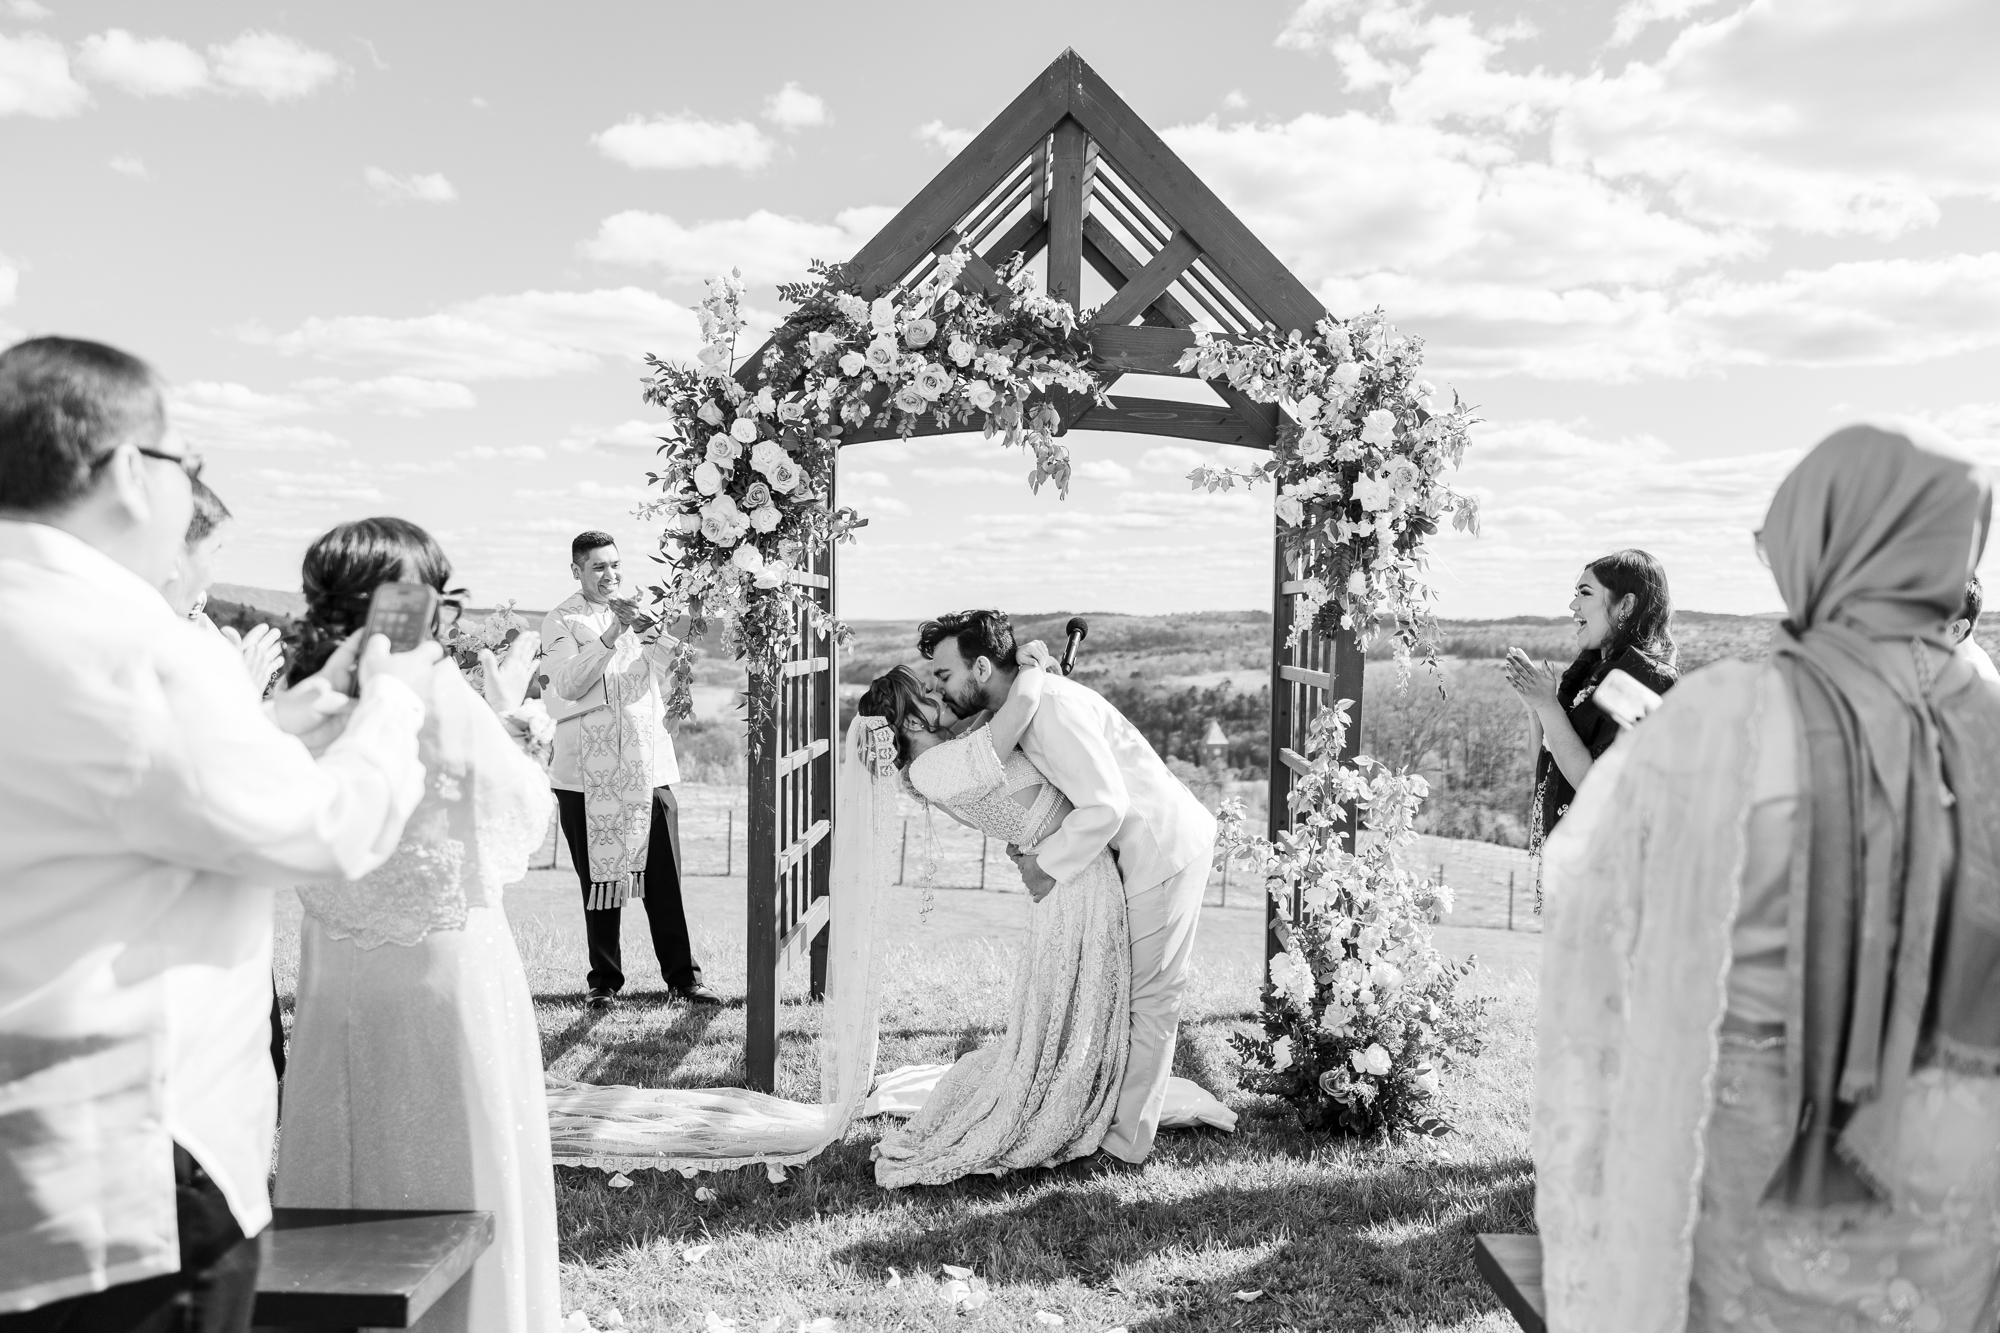 Special Seminary Hill Wedding in the Summertime